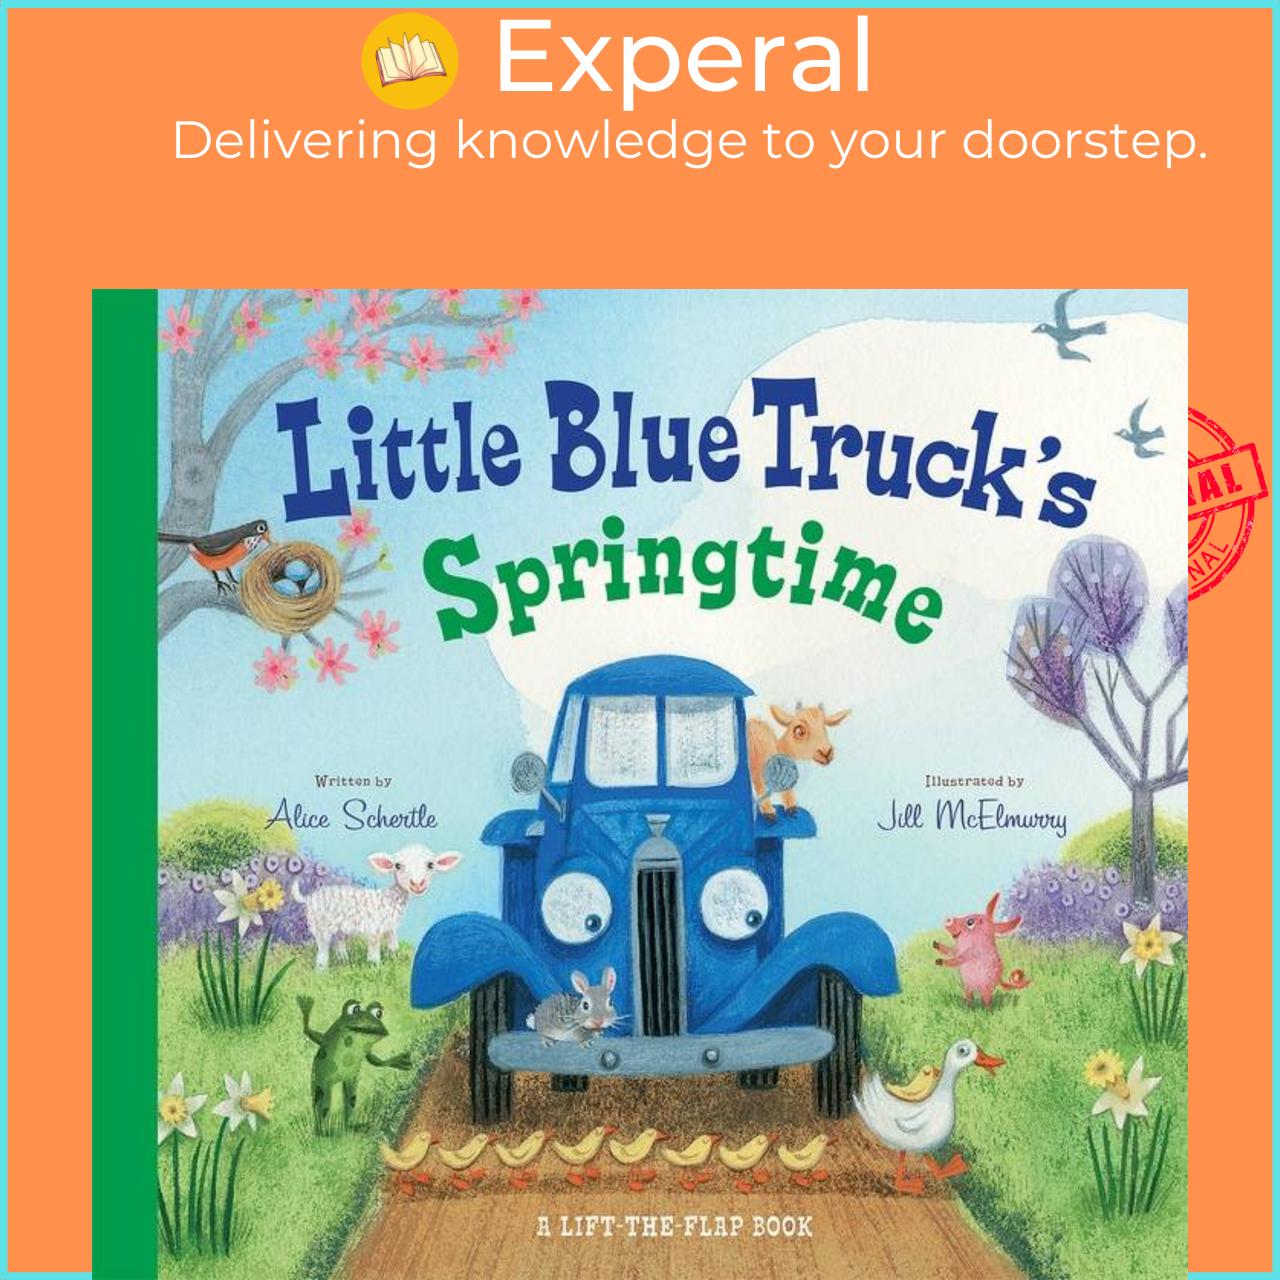 Sách - Little Blue Truck's Springtime - An Easter And Springtime Book For Kids by Alice Schertle (boardbook)